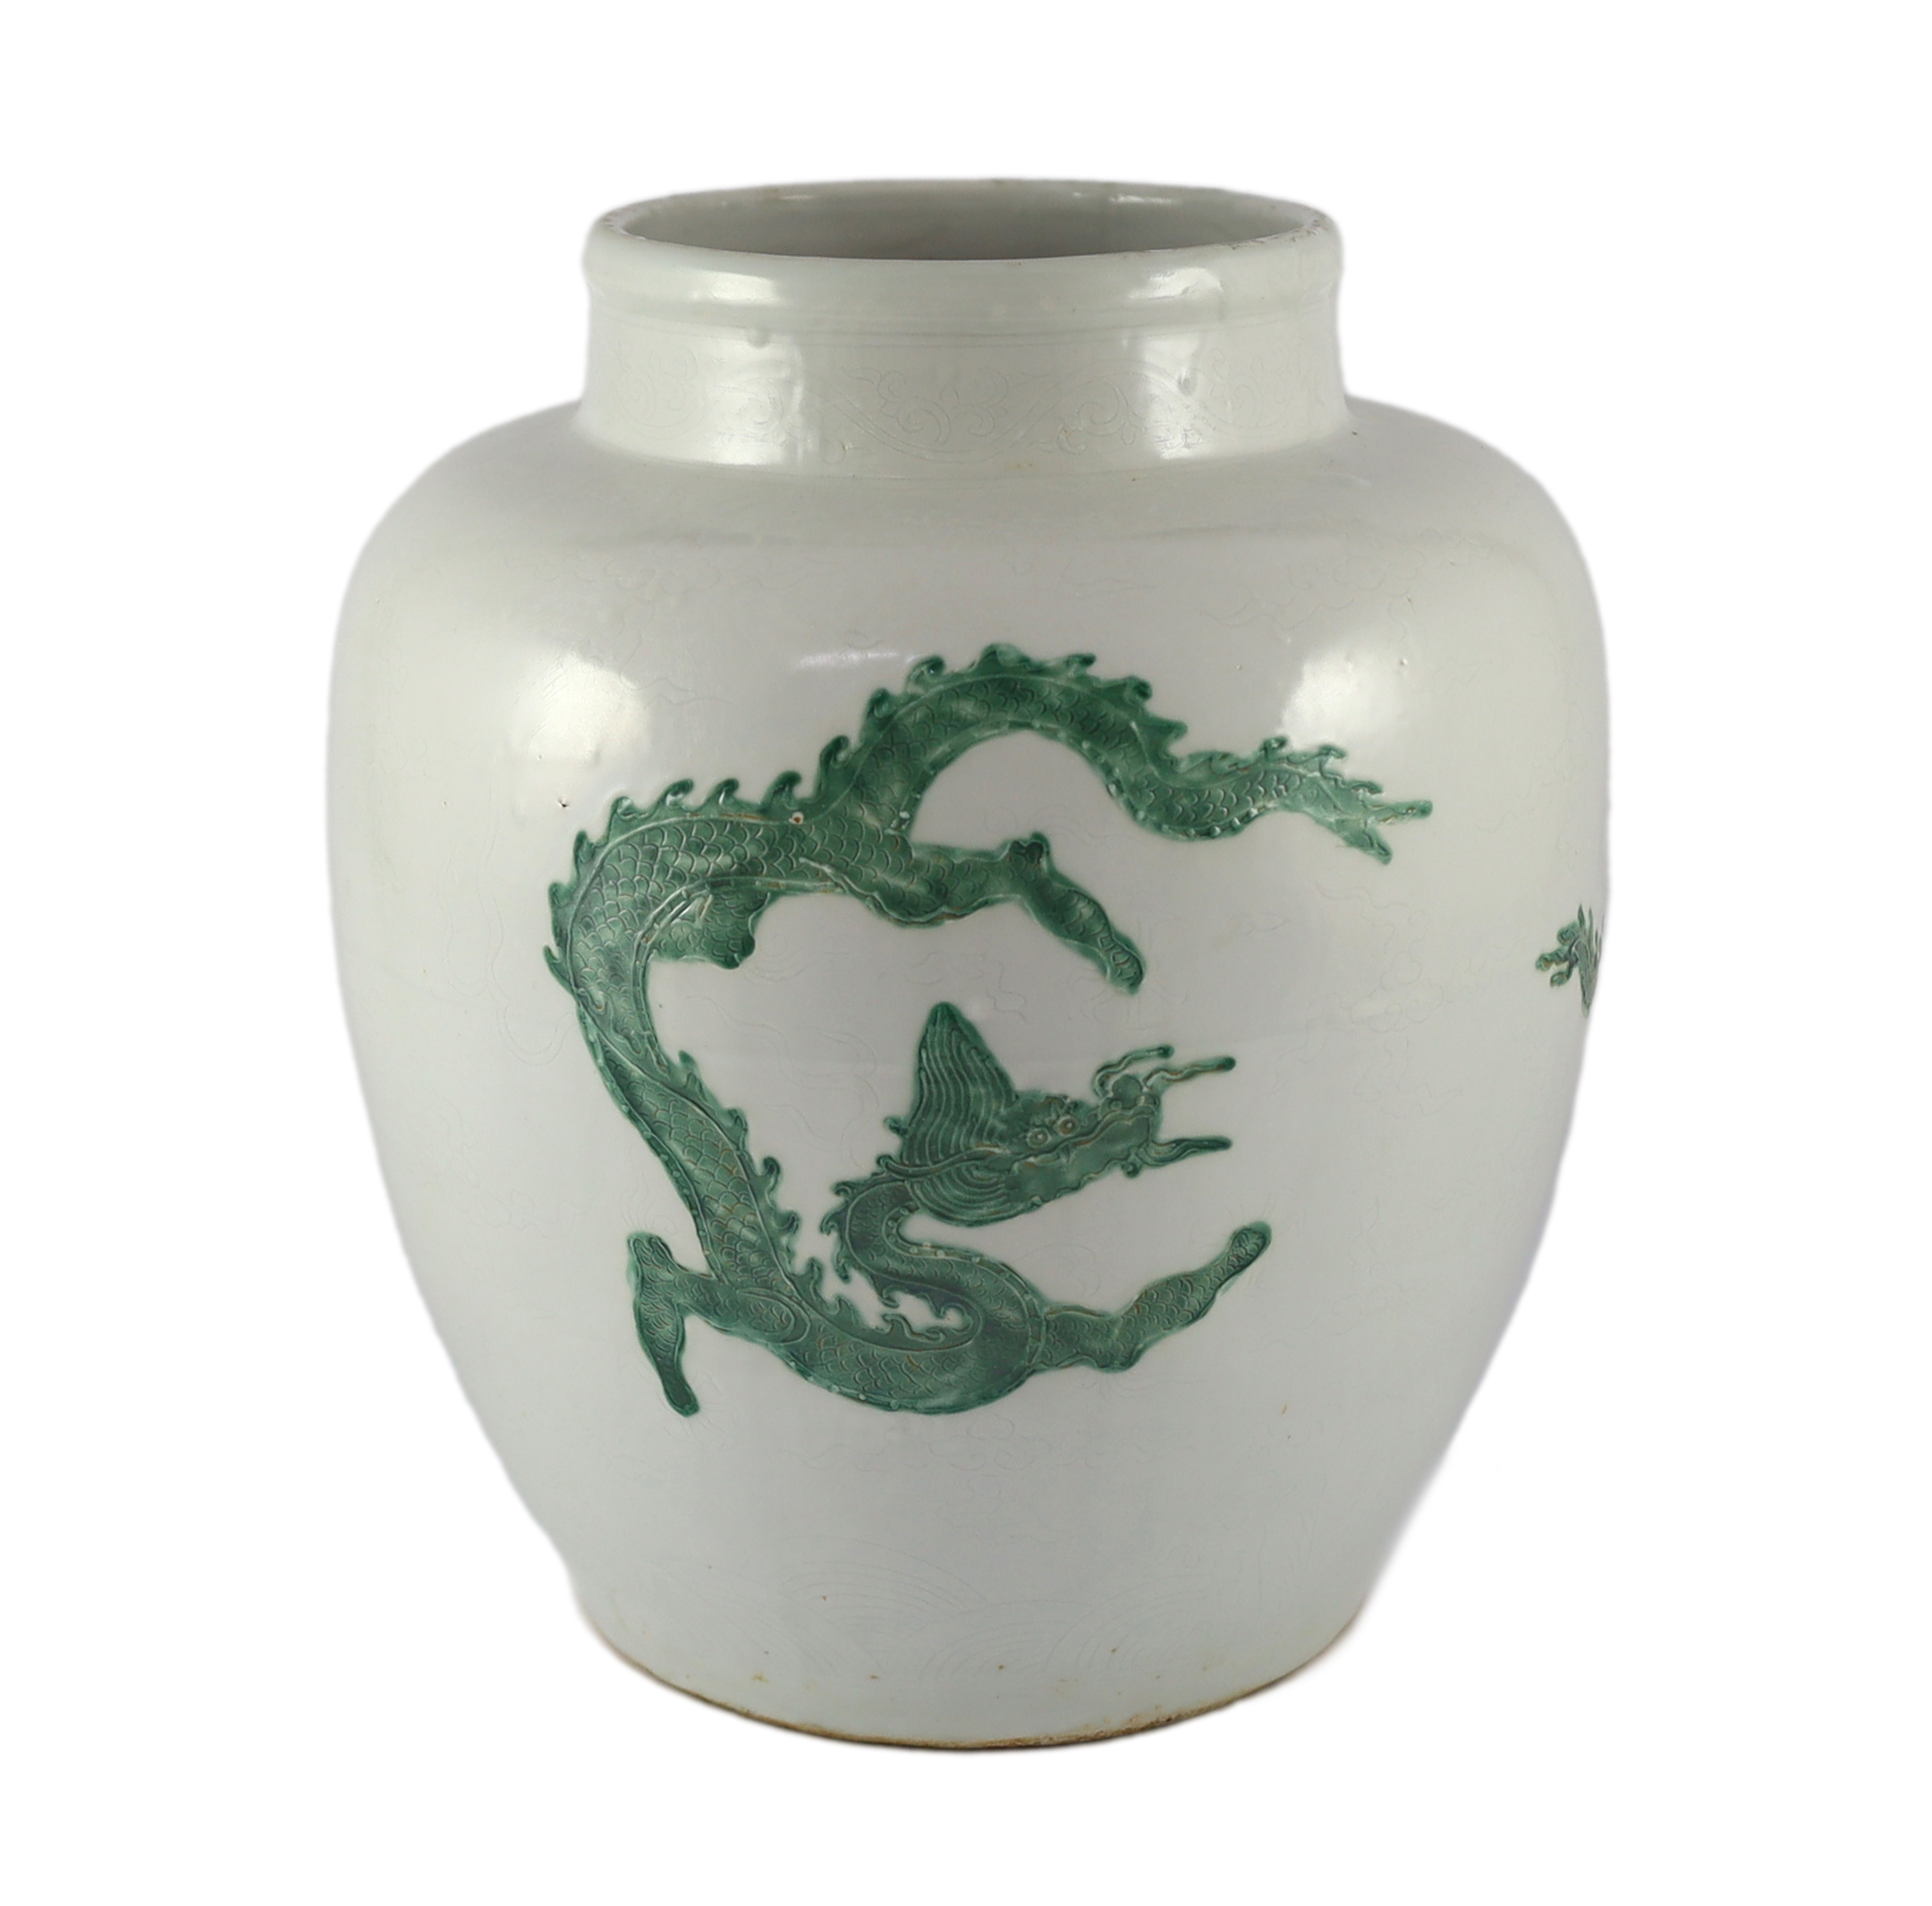 An unusual Chinese Ming style ‘dragon’ jar, 20th century                                                                                                                                                                    